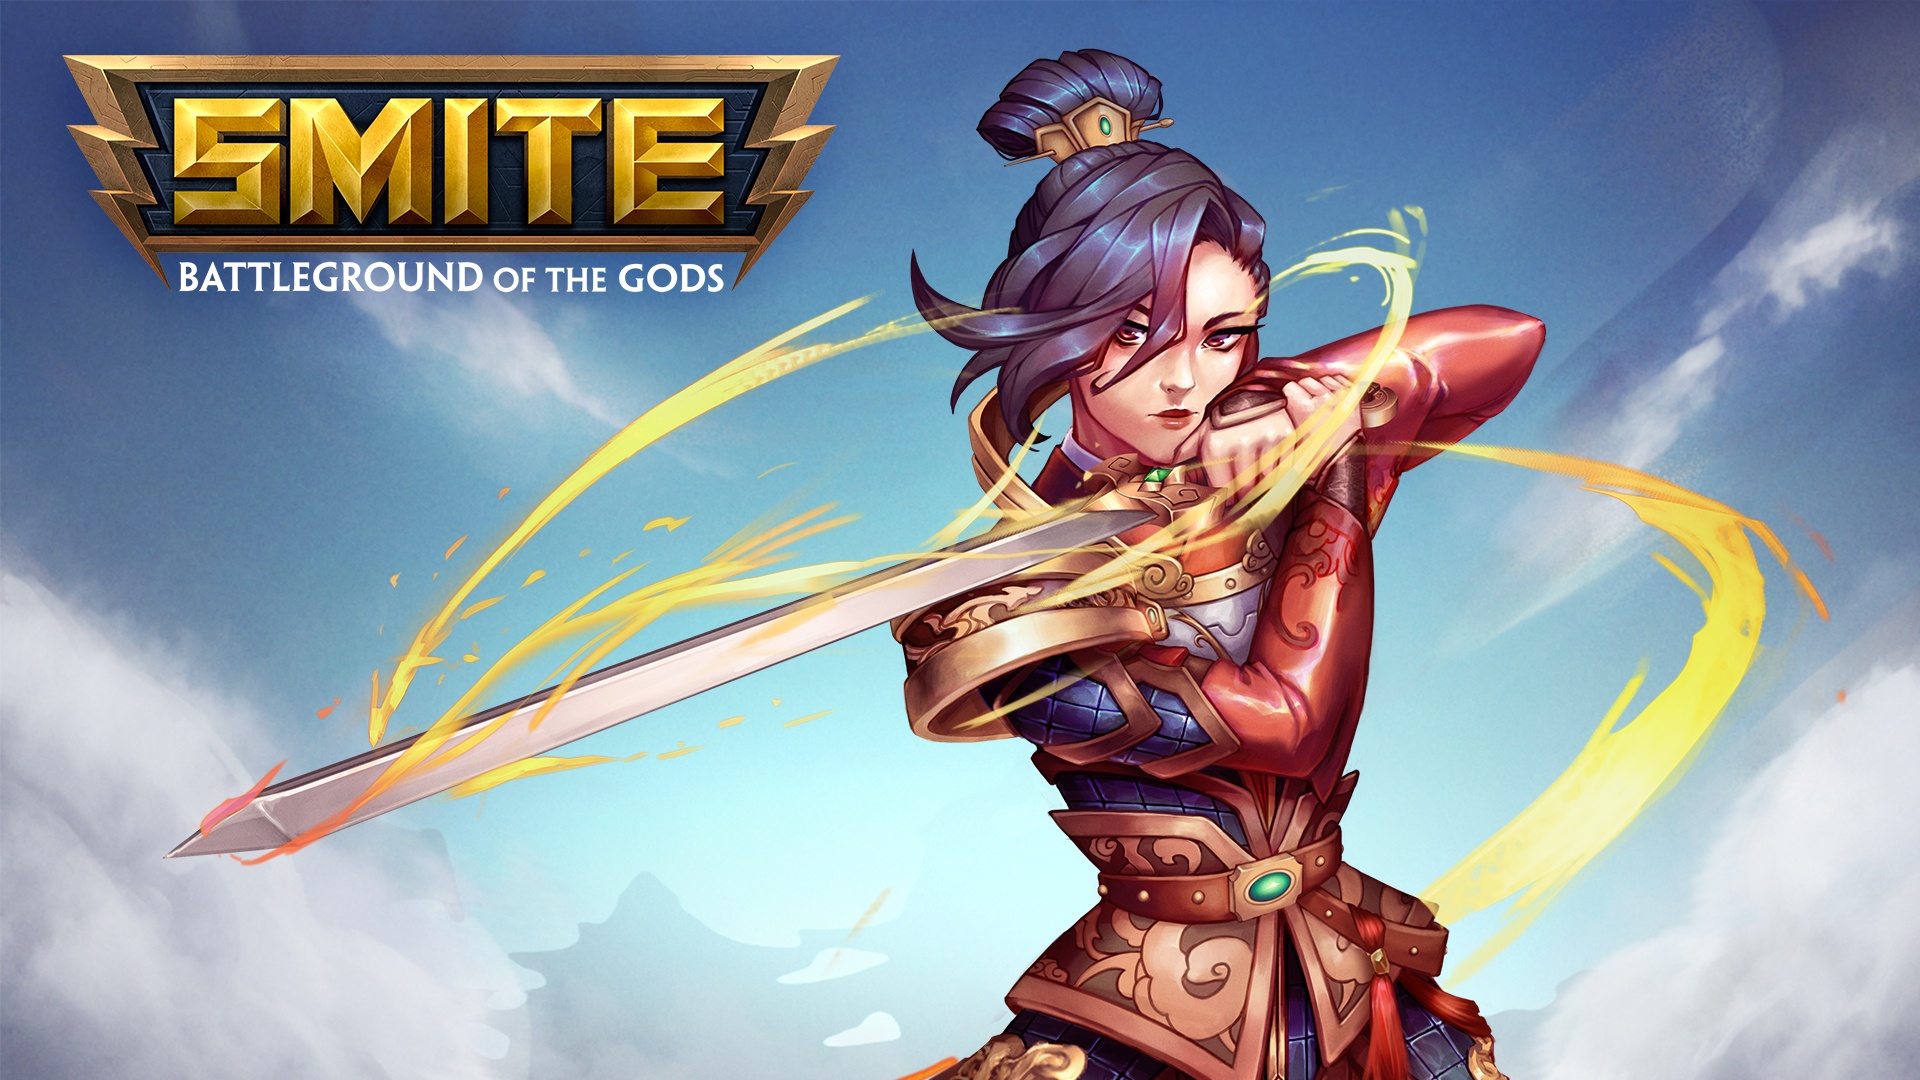 Video For New Smite Goddess: Mulan Ascends to the Battleground of the Gods